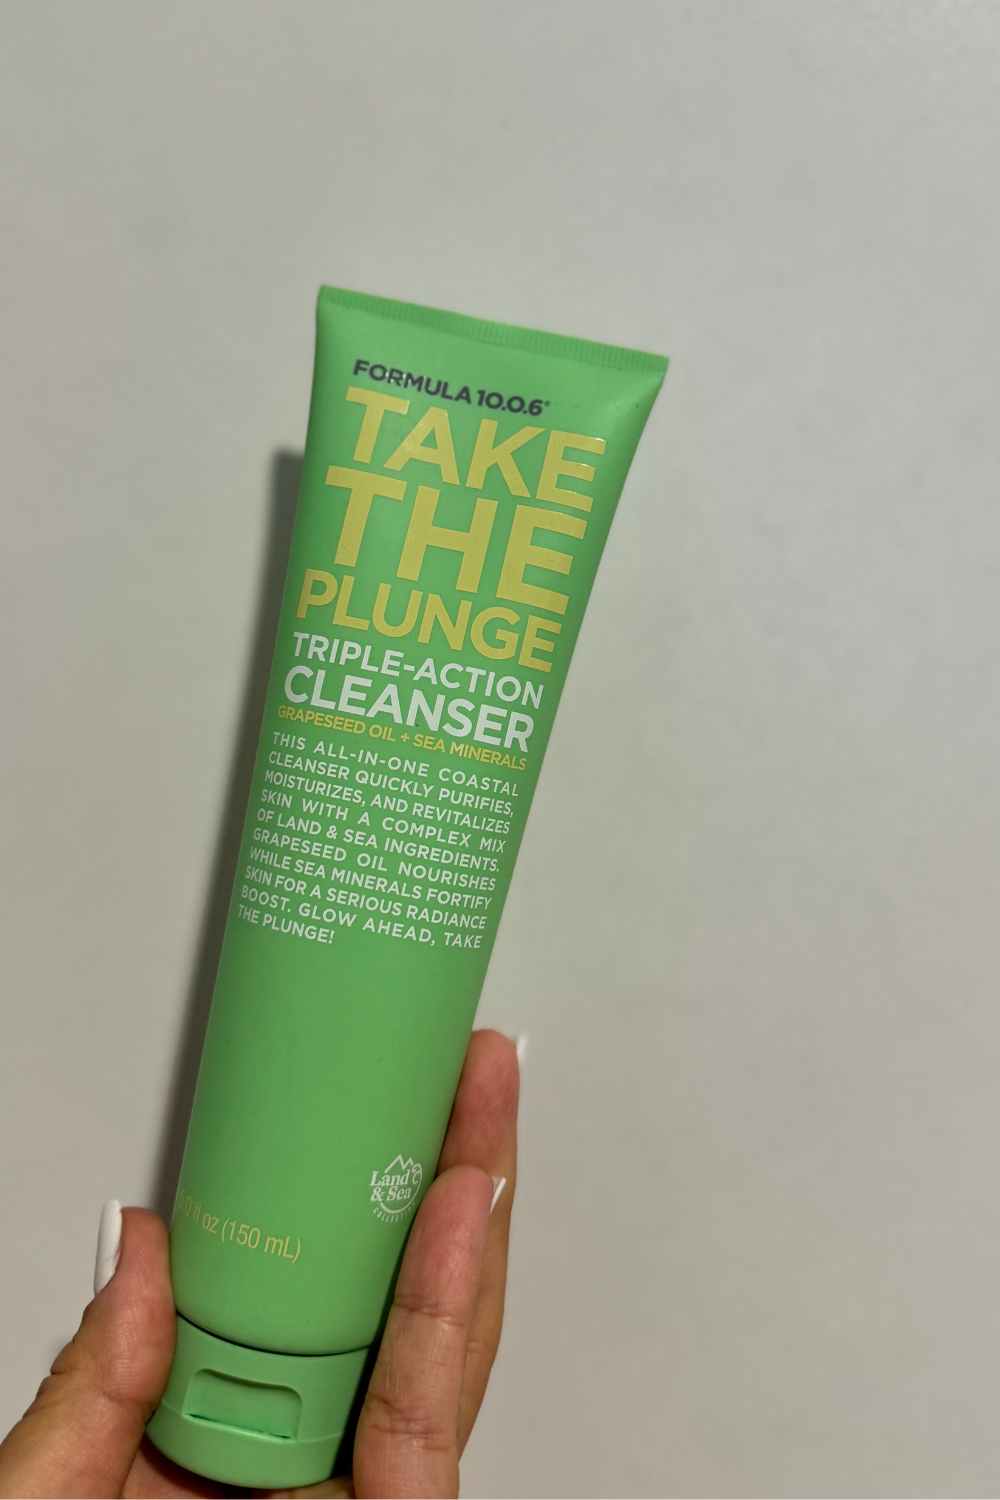 FORMULA 10.0.6 Take the Plunge Triple Action Cleanser: A Personal Review